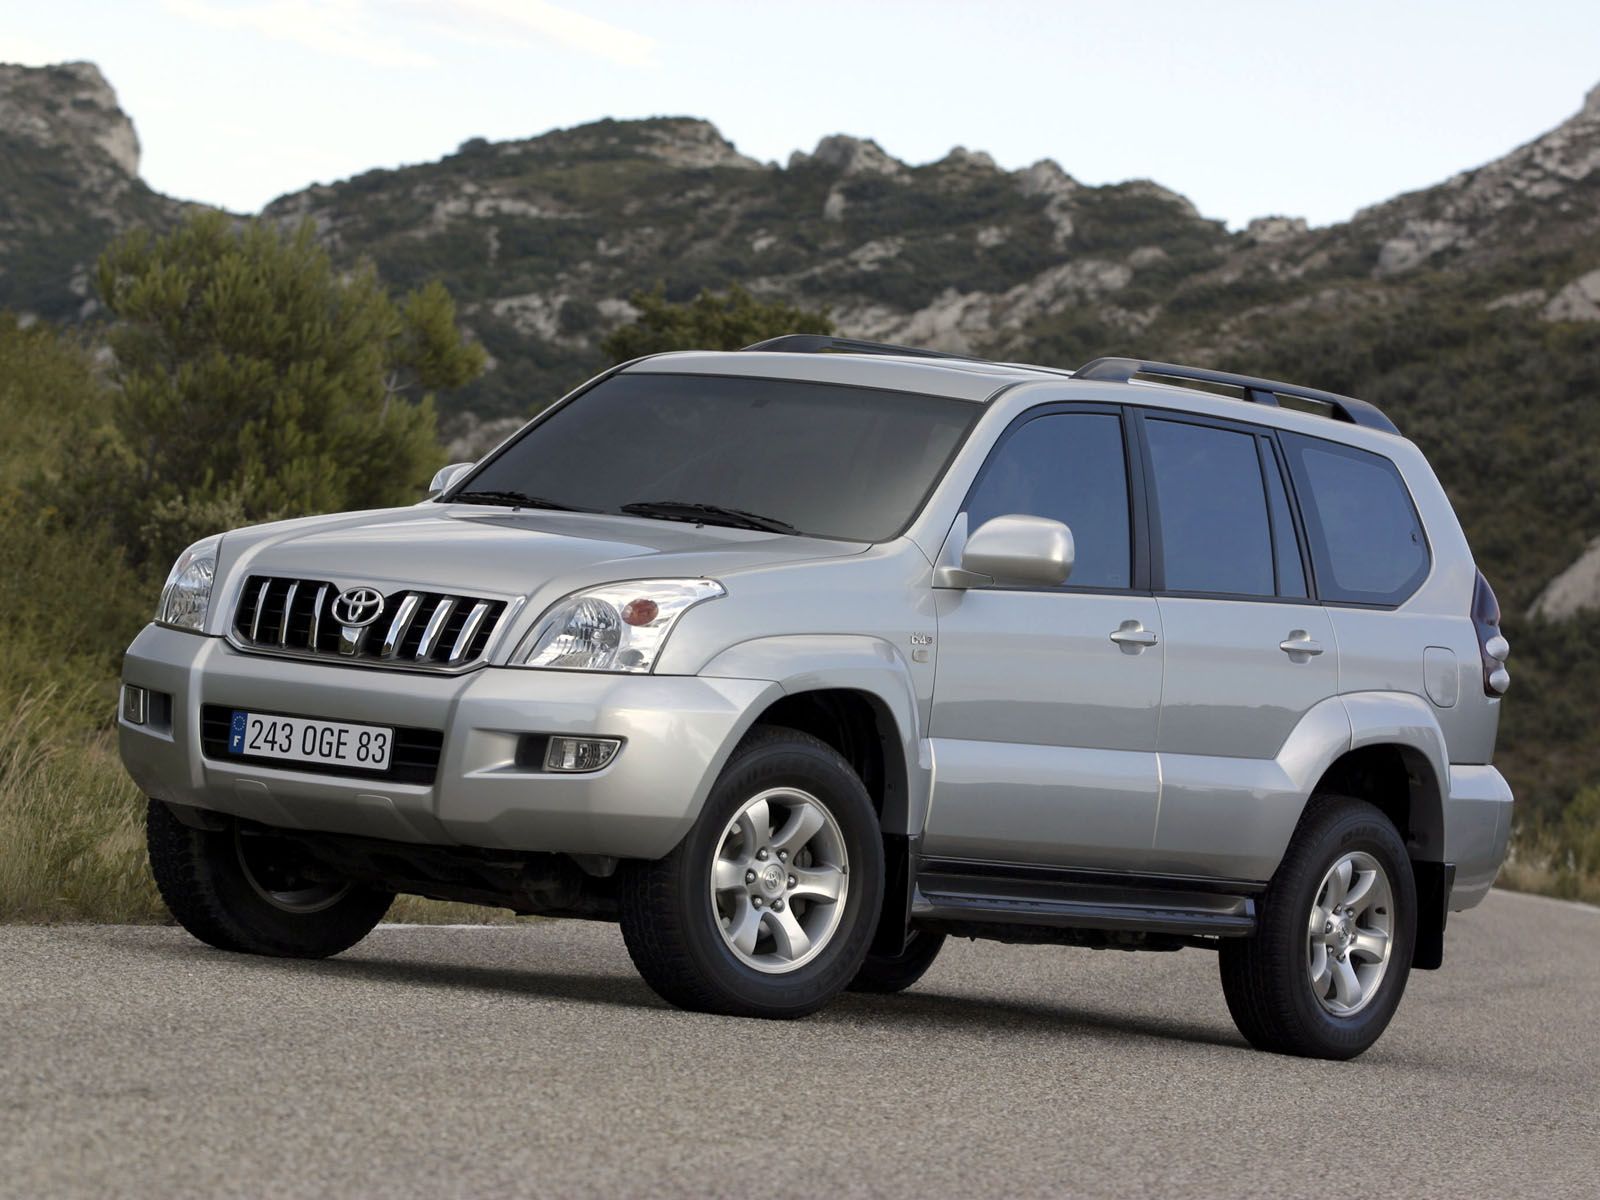 Toyota Land Cruiser 120 photos PhotoGallery with 9 pics